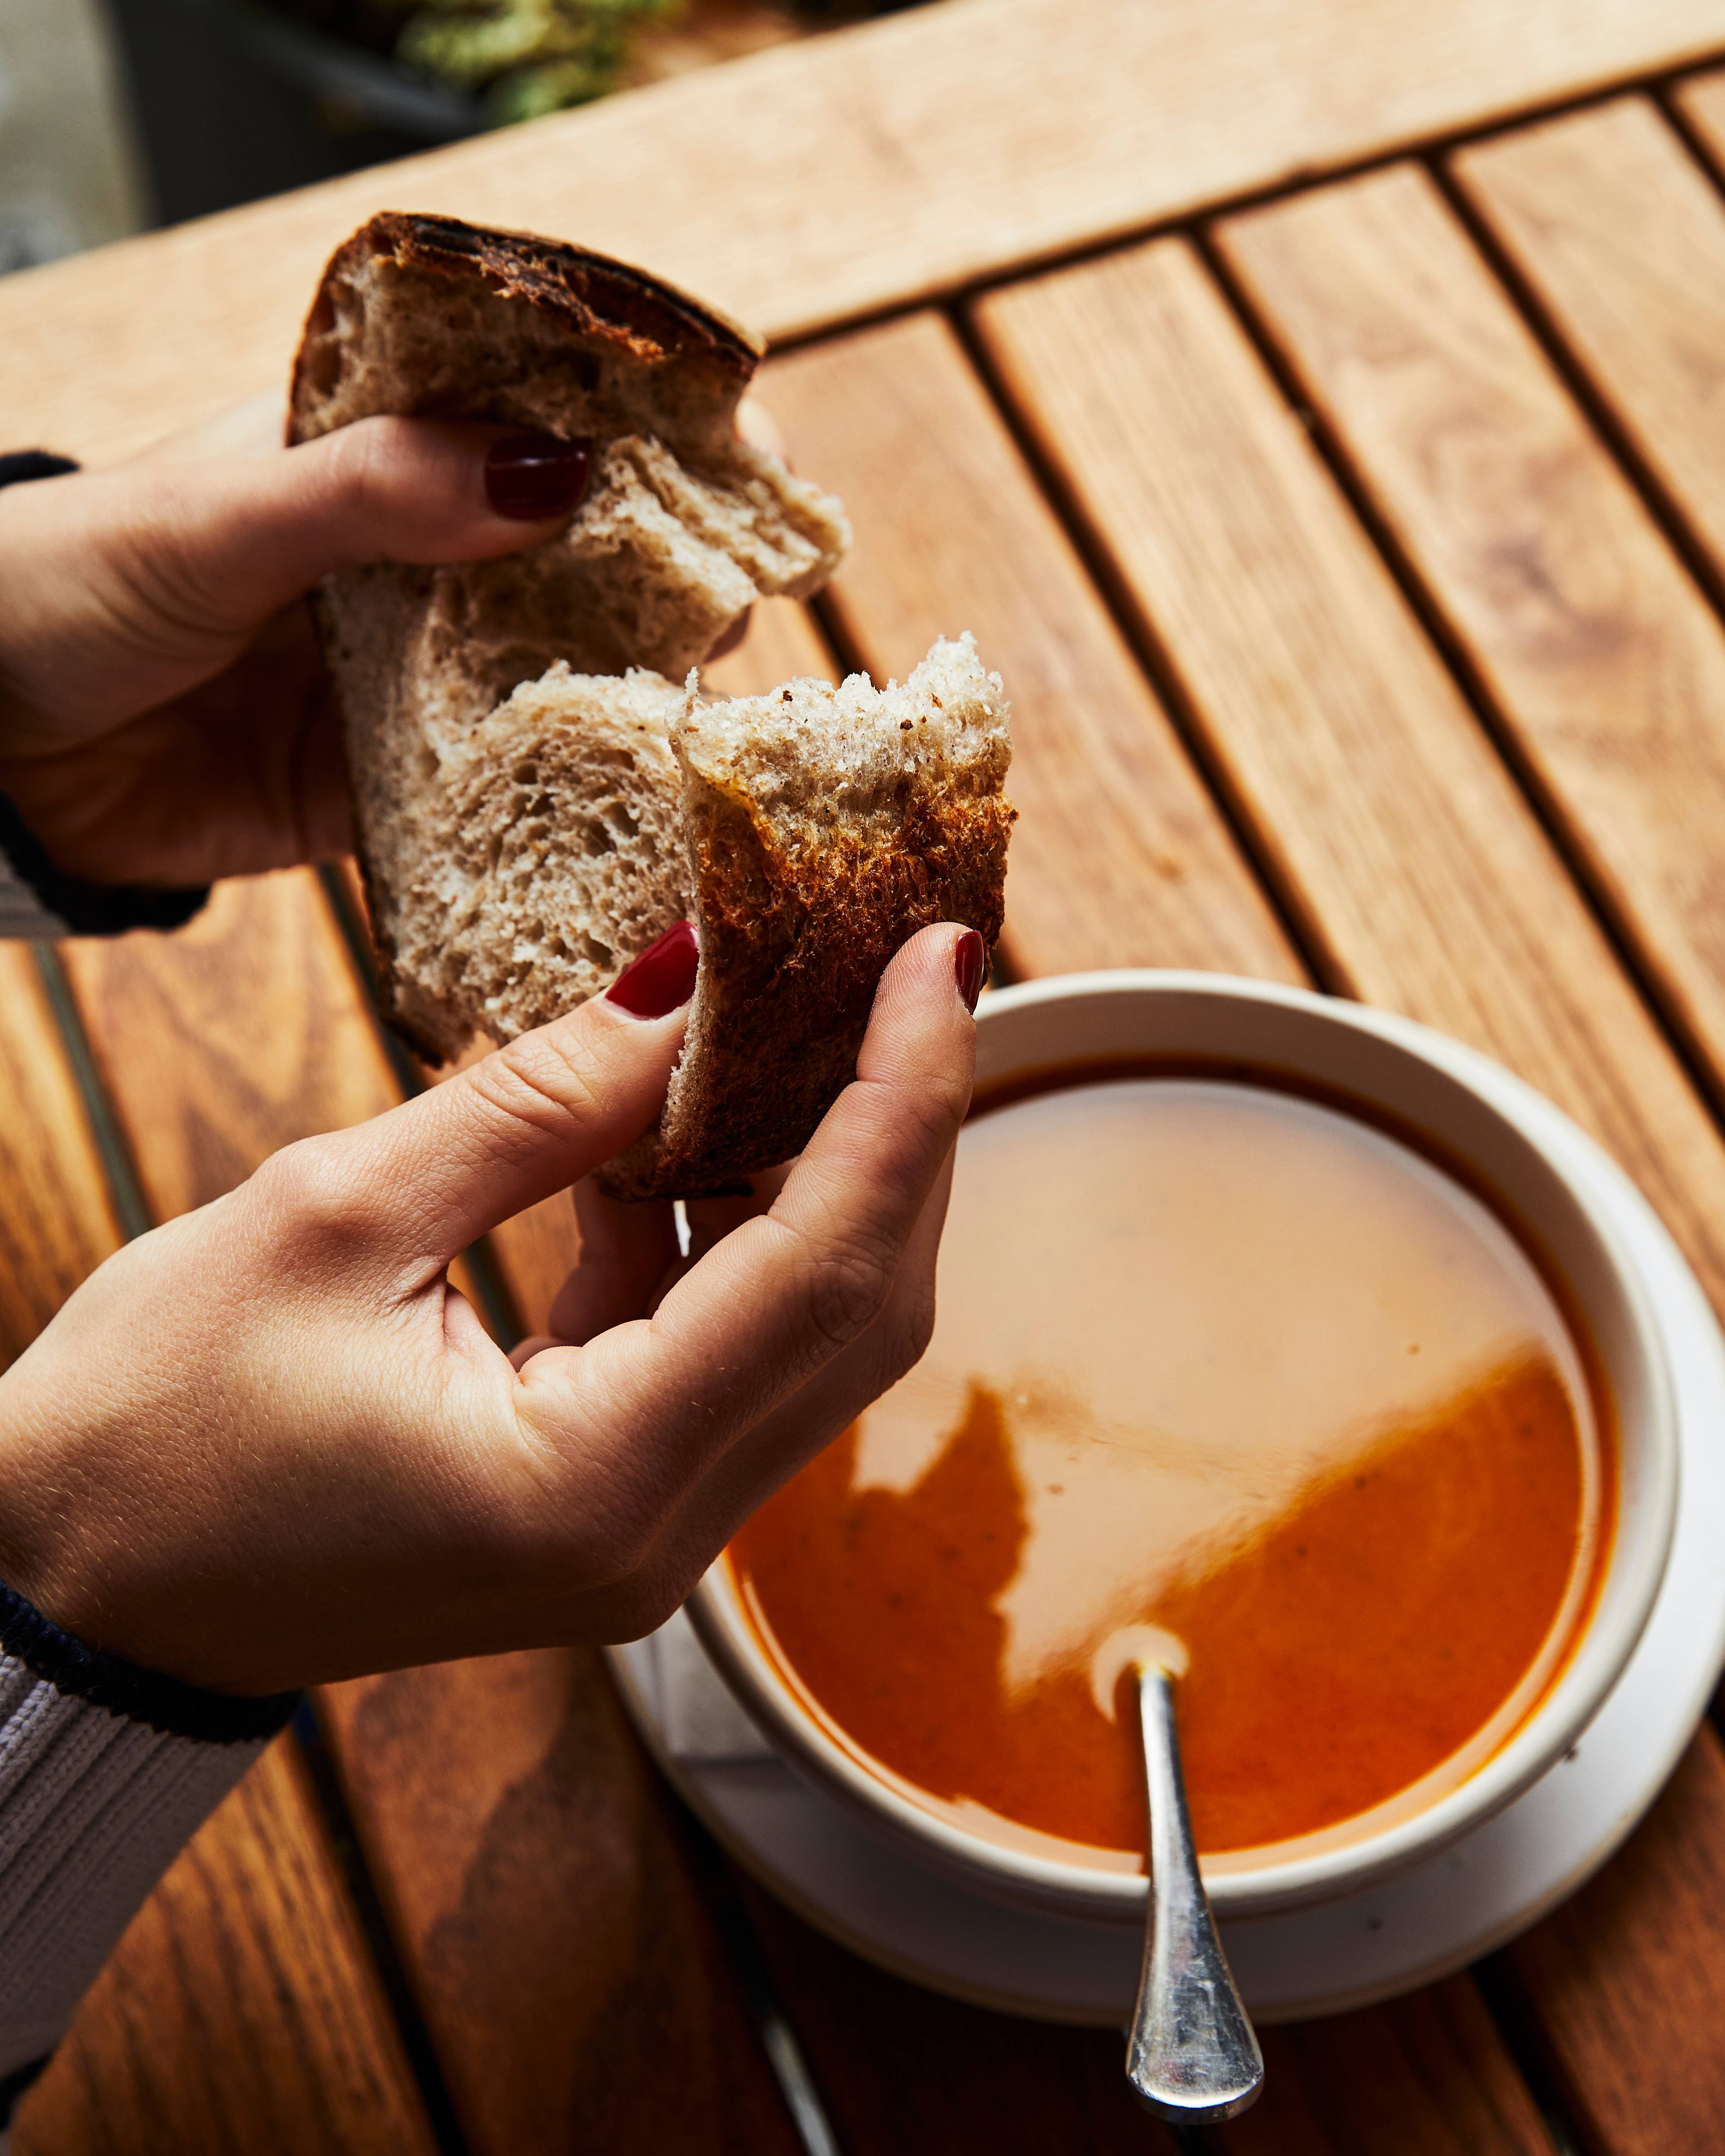 Tearing bread over Delica soup